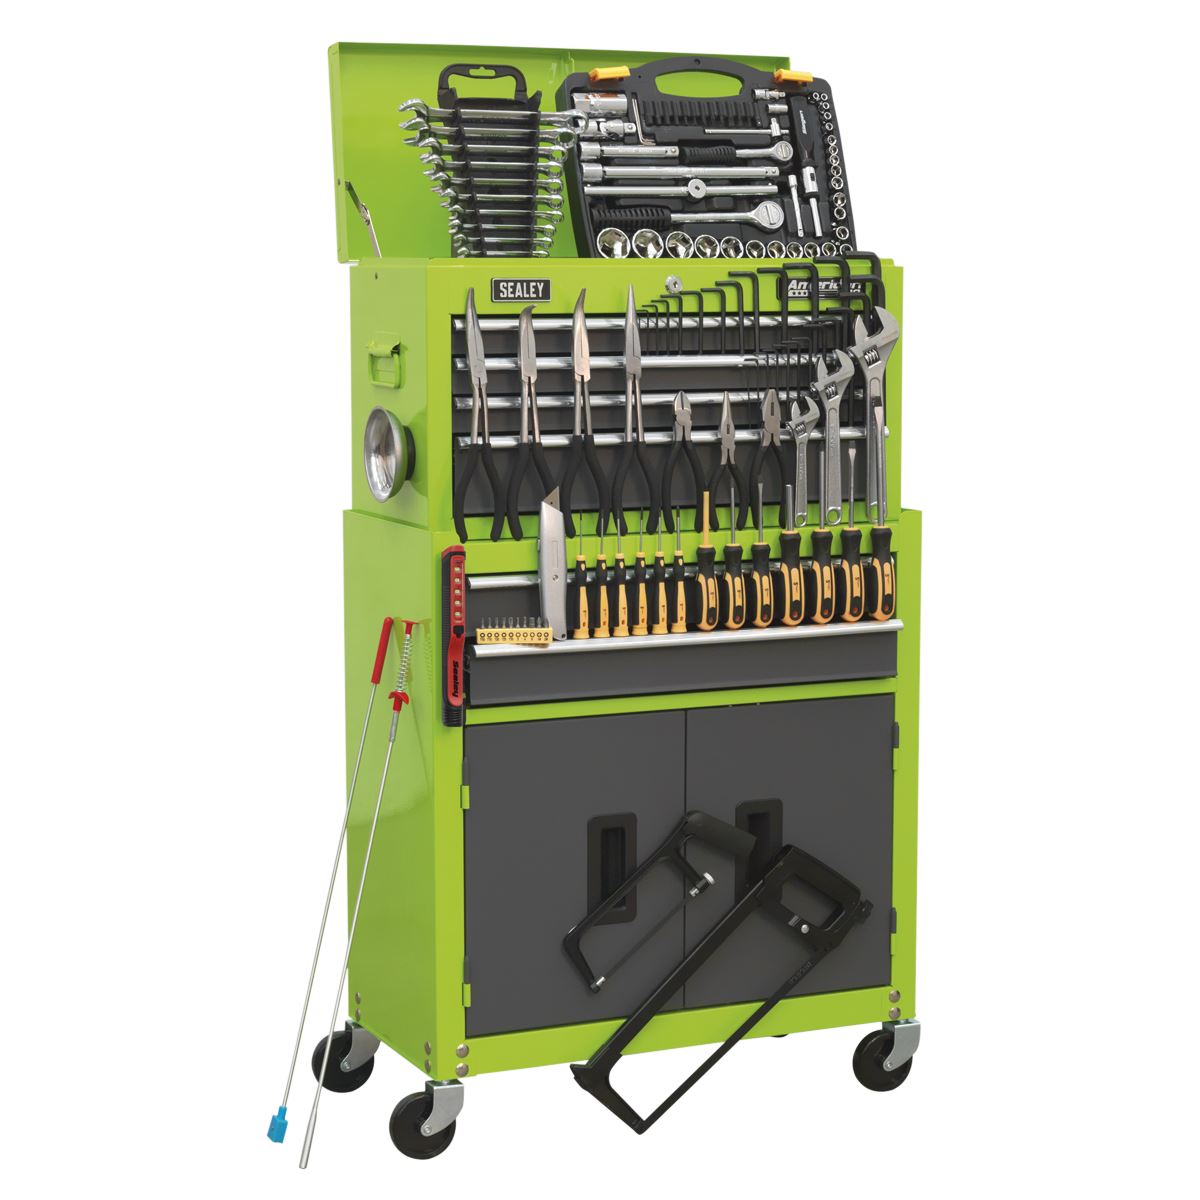 Sealey American Pro 6 Drawer Topchest & Rollcab Combination with Ball-Bearing Slides - Hi-Vis Green/Grey & 170pc Tool Kit